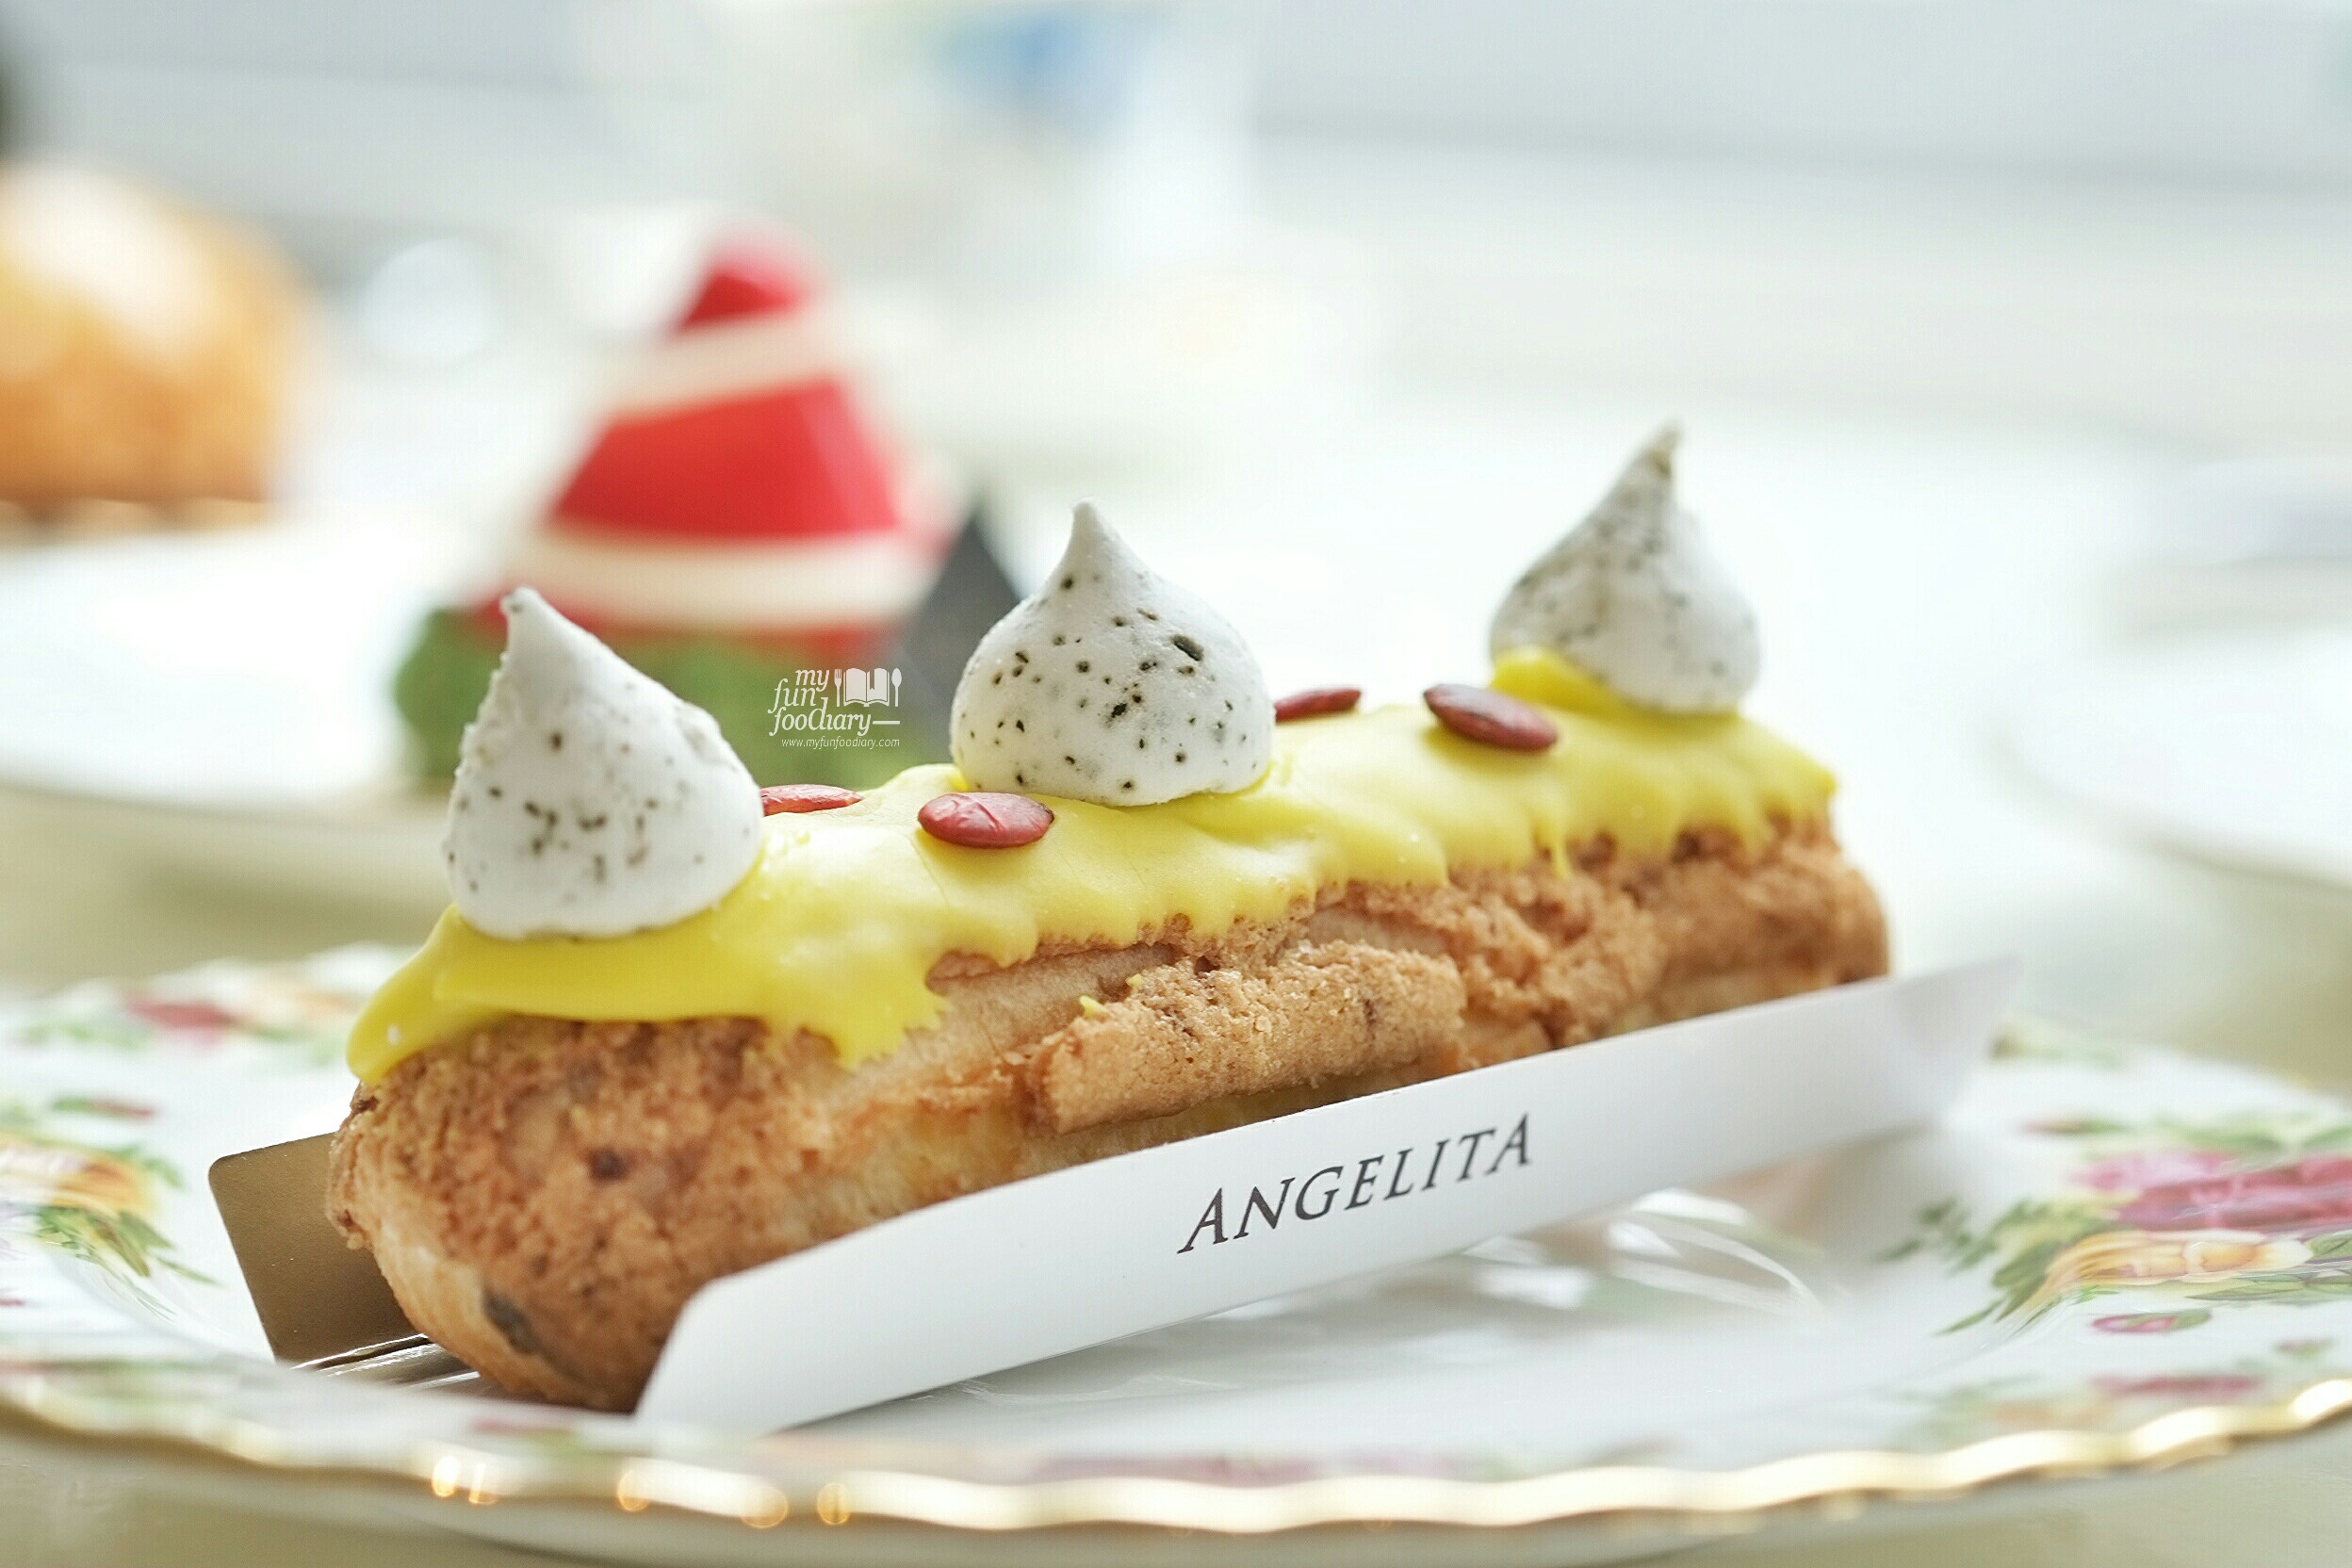 Passion Fruit Eclair at Angelita Patisserie by Myfunfoodiary